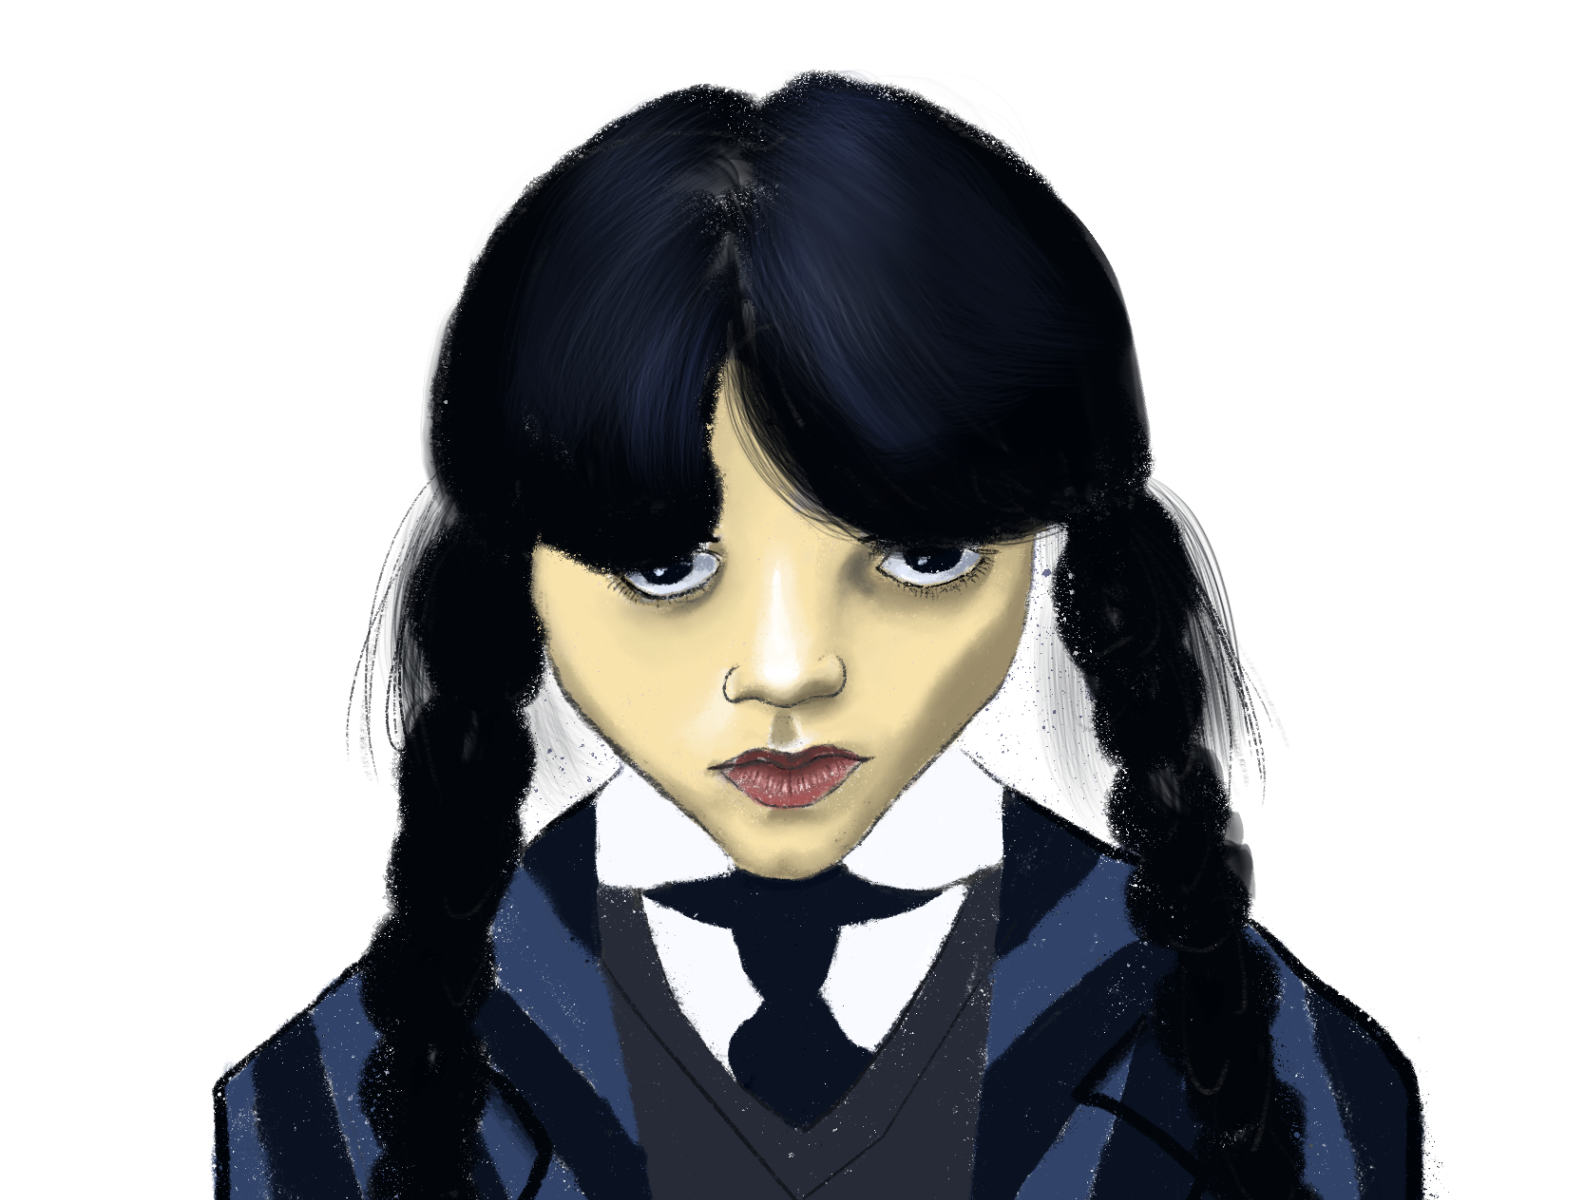 Wednesday Addams by Husain on Dribbble